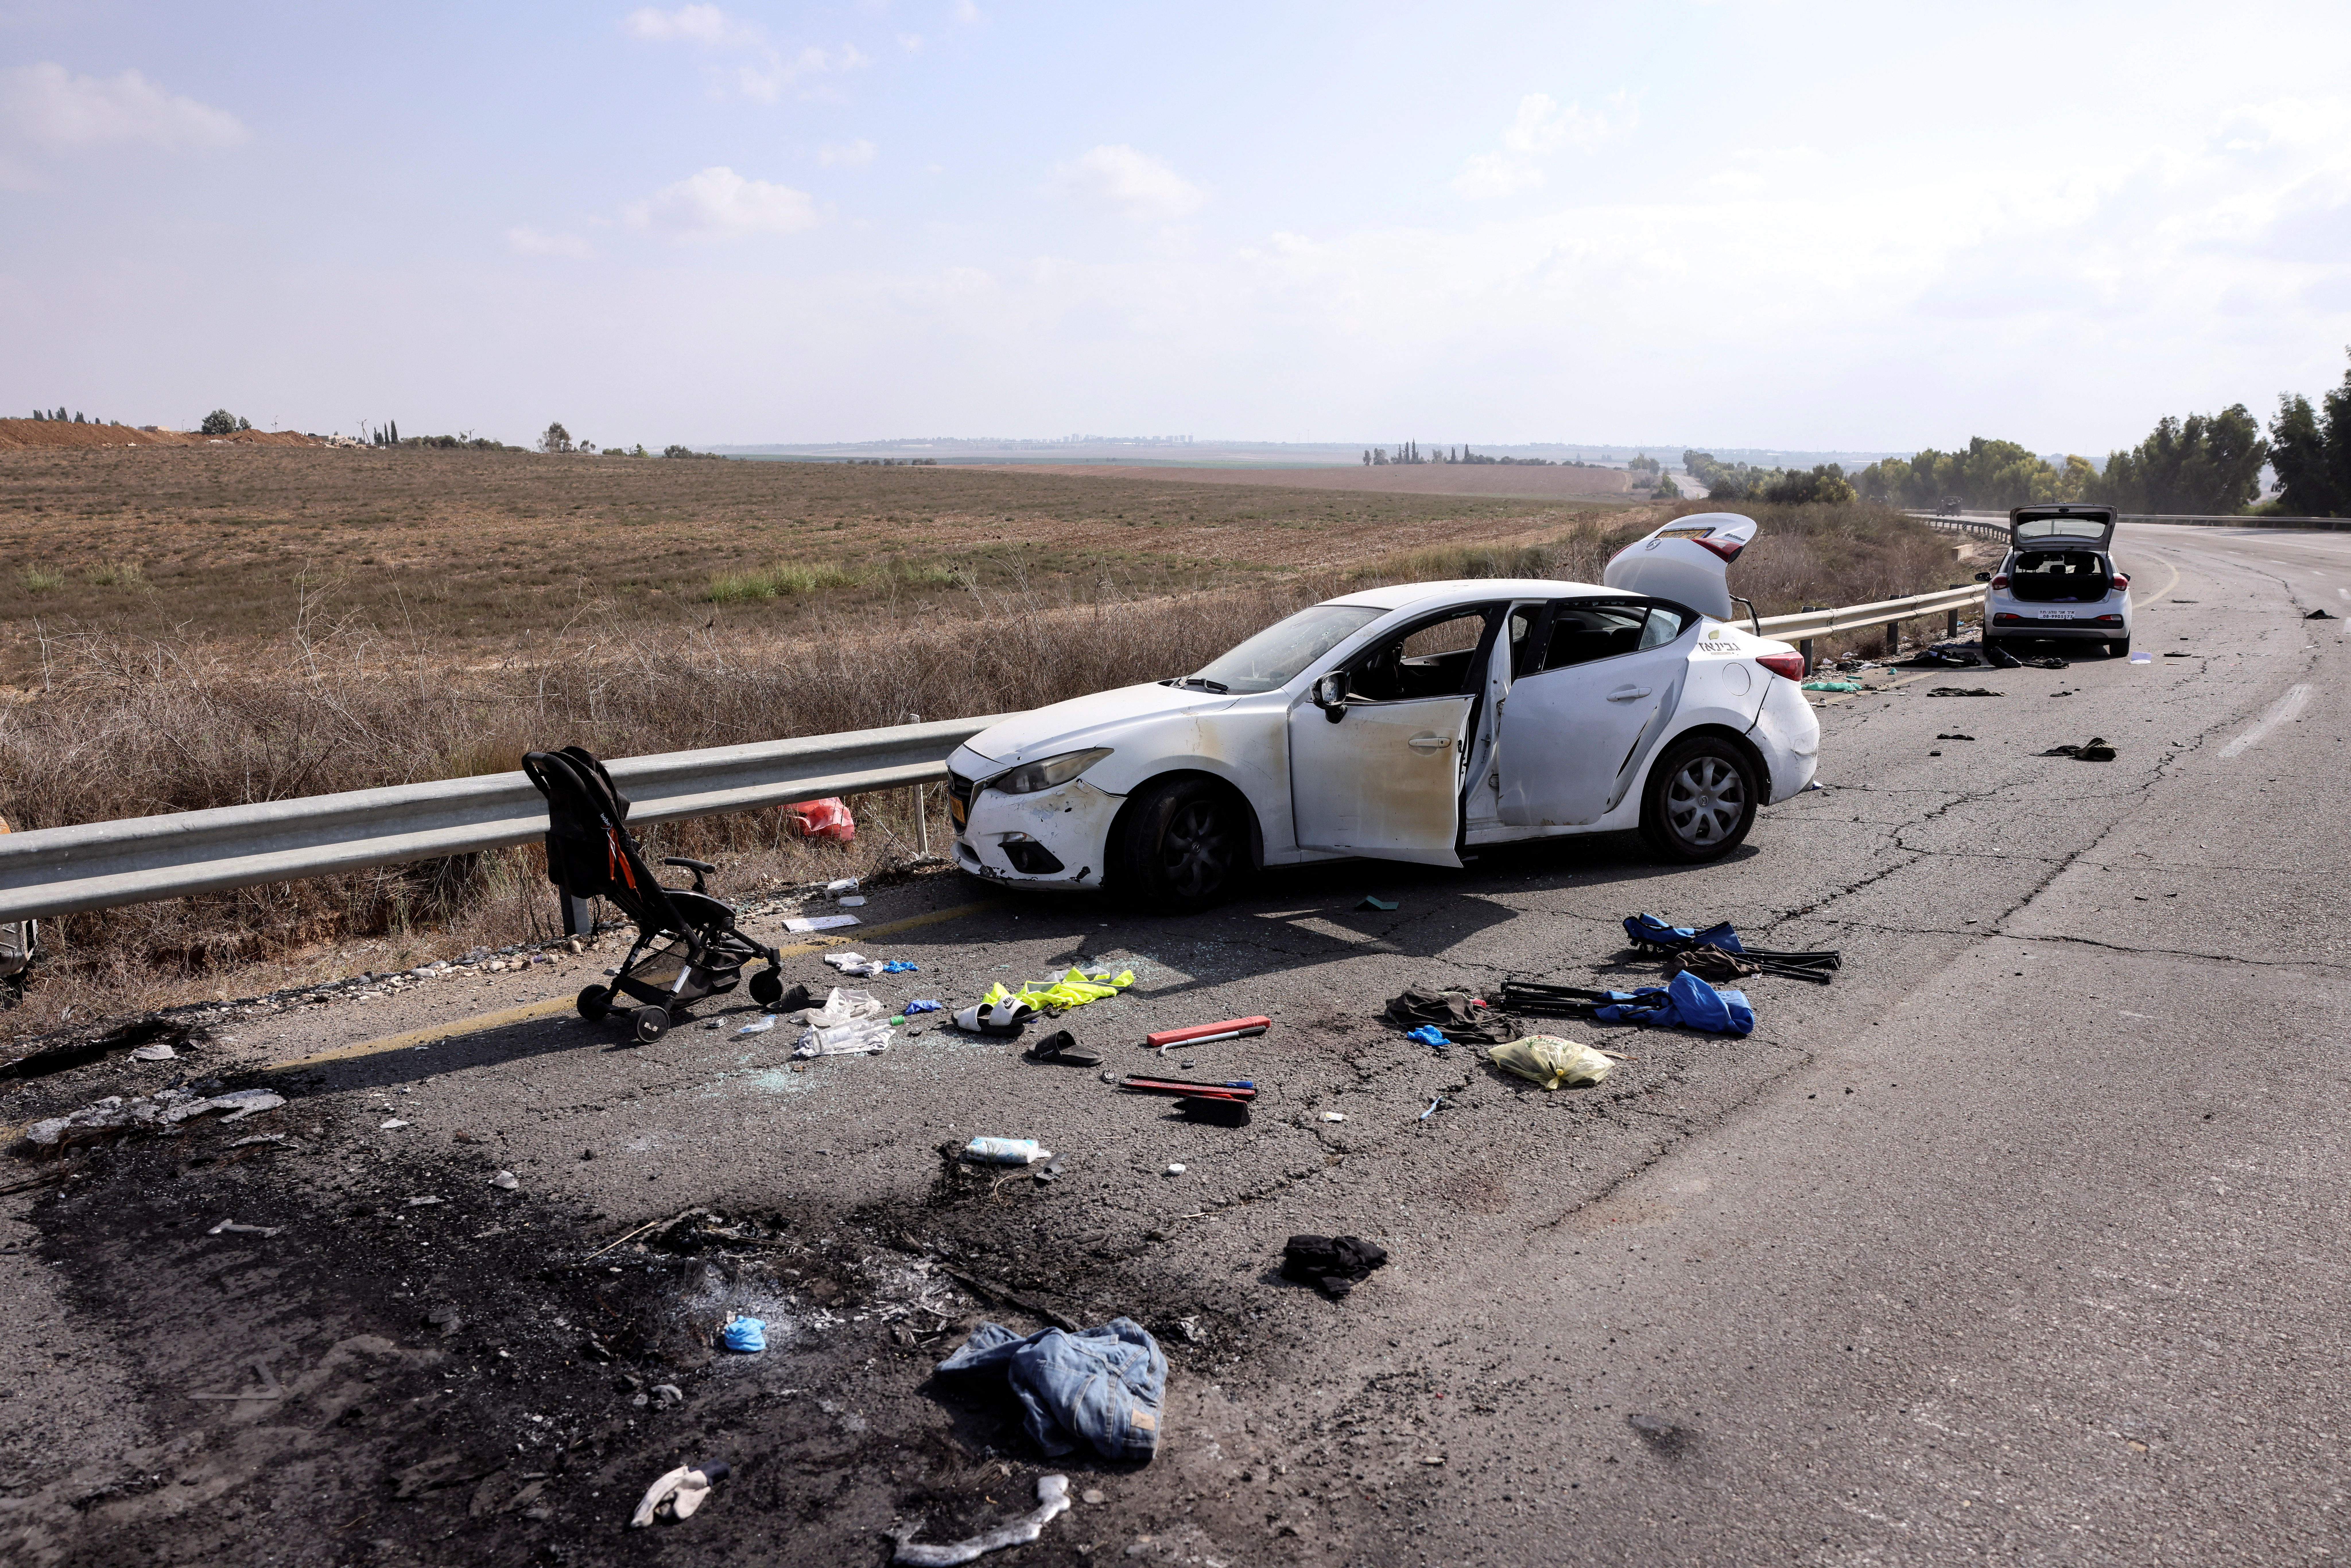 Personal belongings including a child's pram are seen on the road days after a mass infiltration by Hamas gunmen from the Gaza Strip, near Kibbutz Kfar Aza, in southern Israel